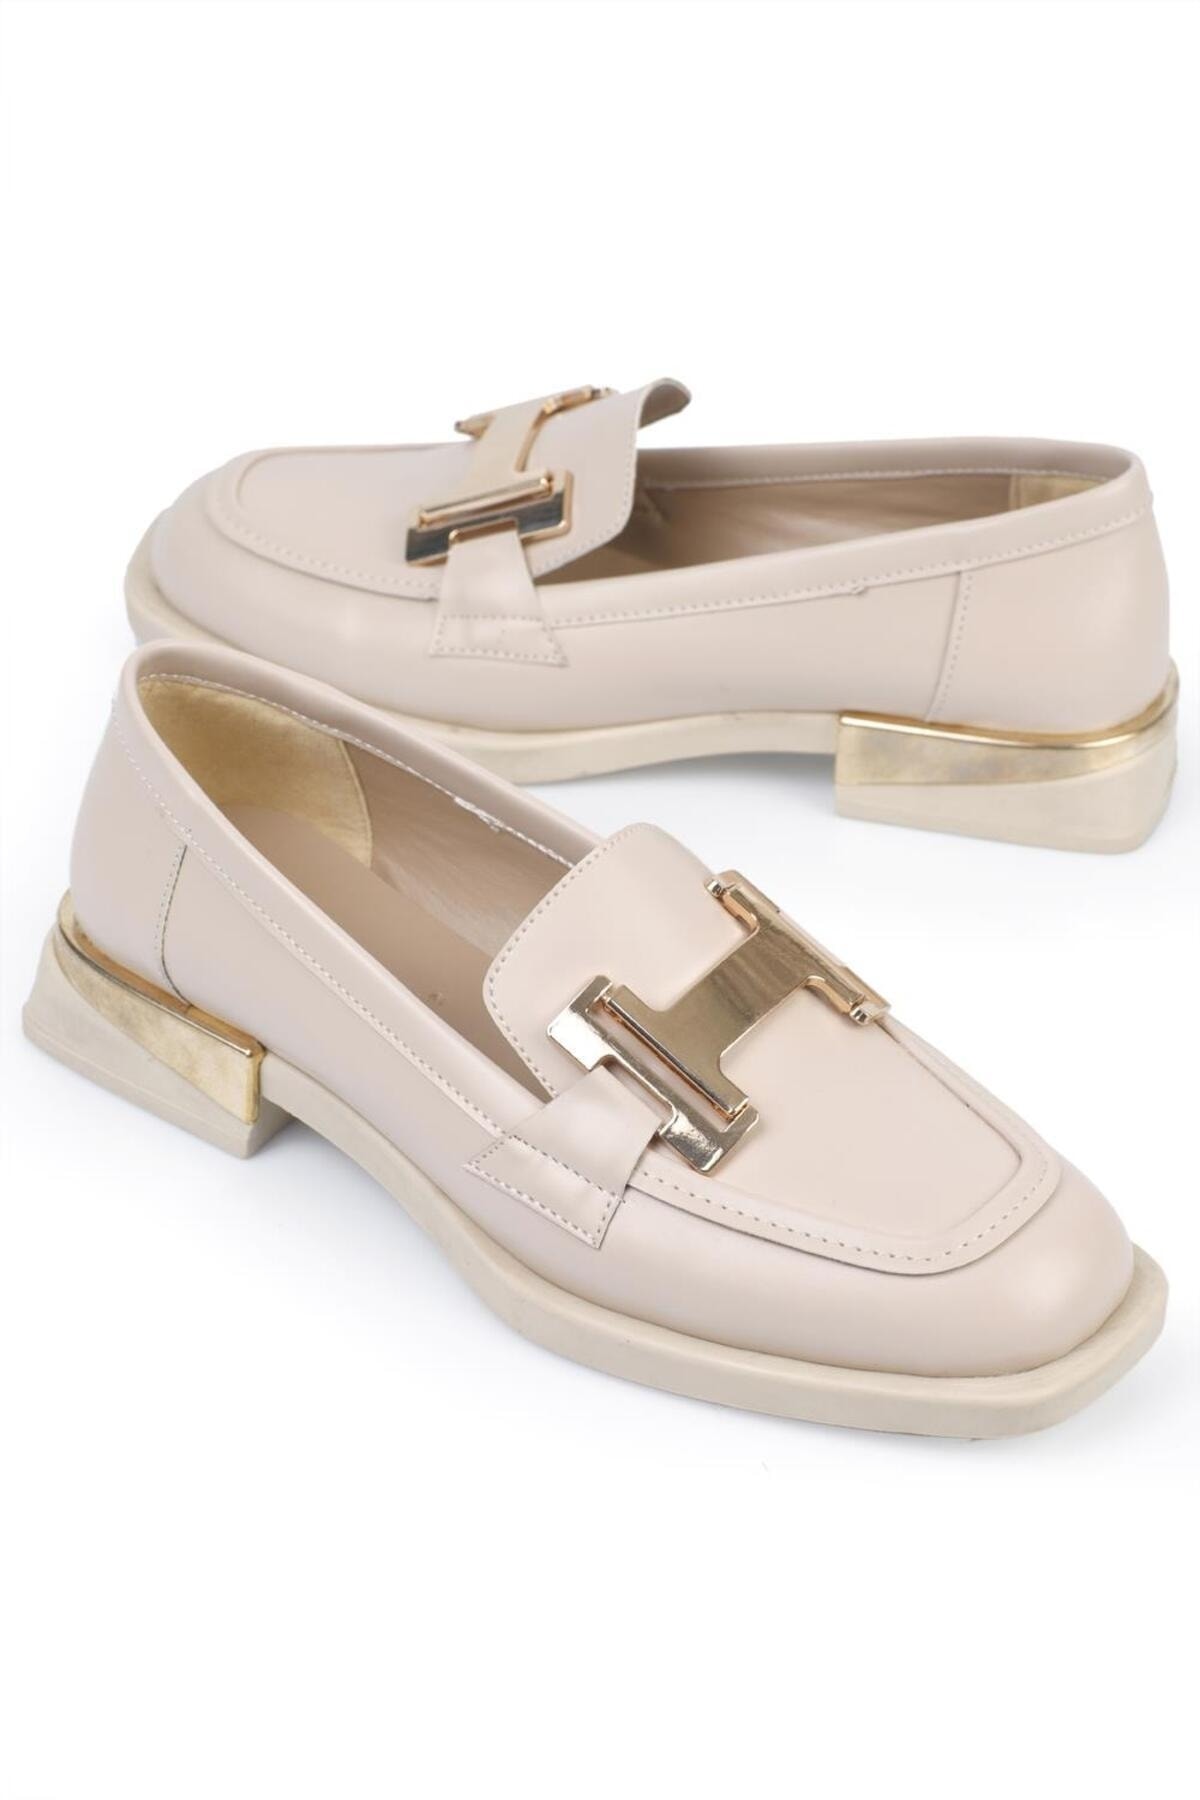 Capone Outfitters Capone Women's Chunky Toe Loafers with H Buckles